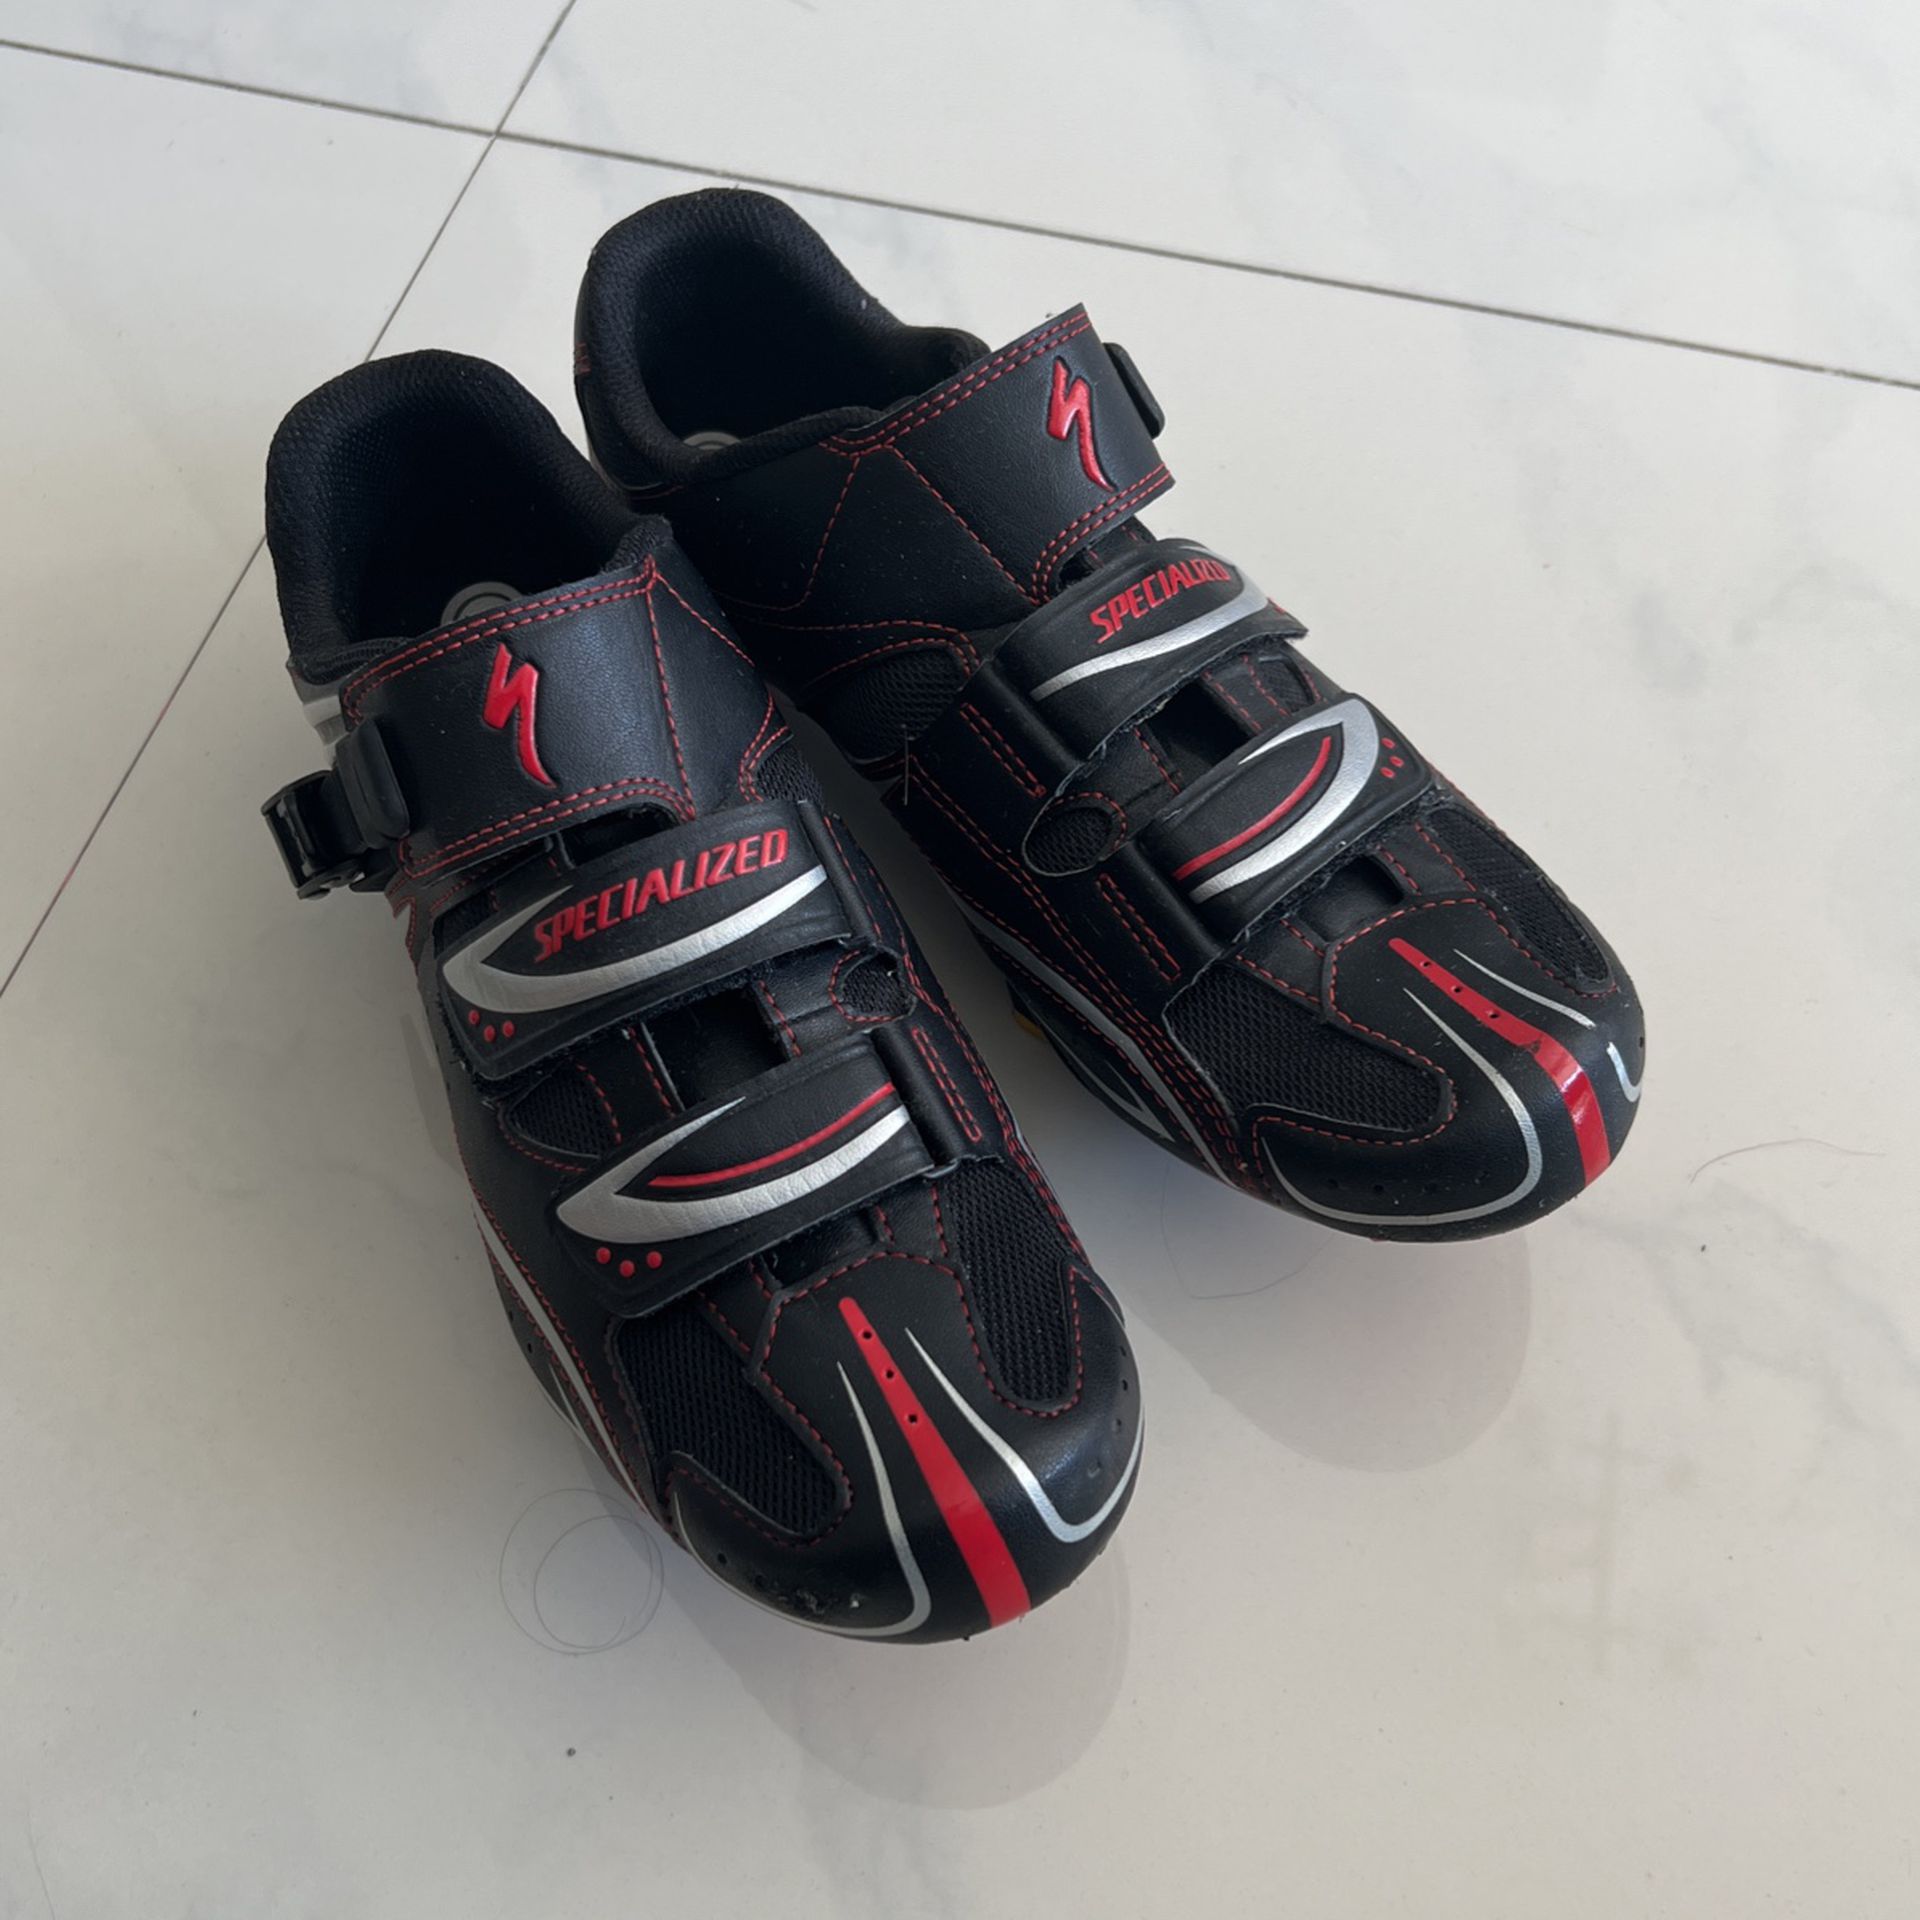 Specialized Bike Shoes With Cleats